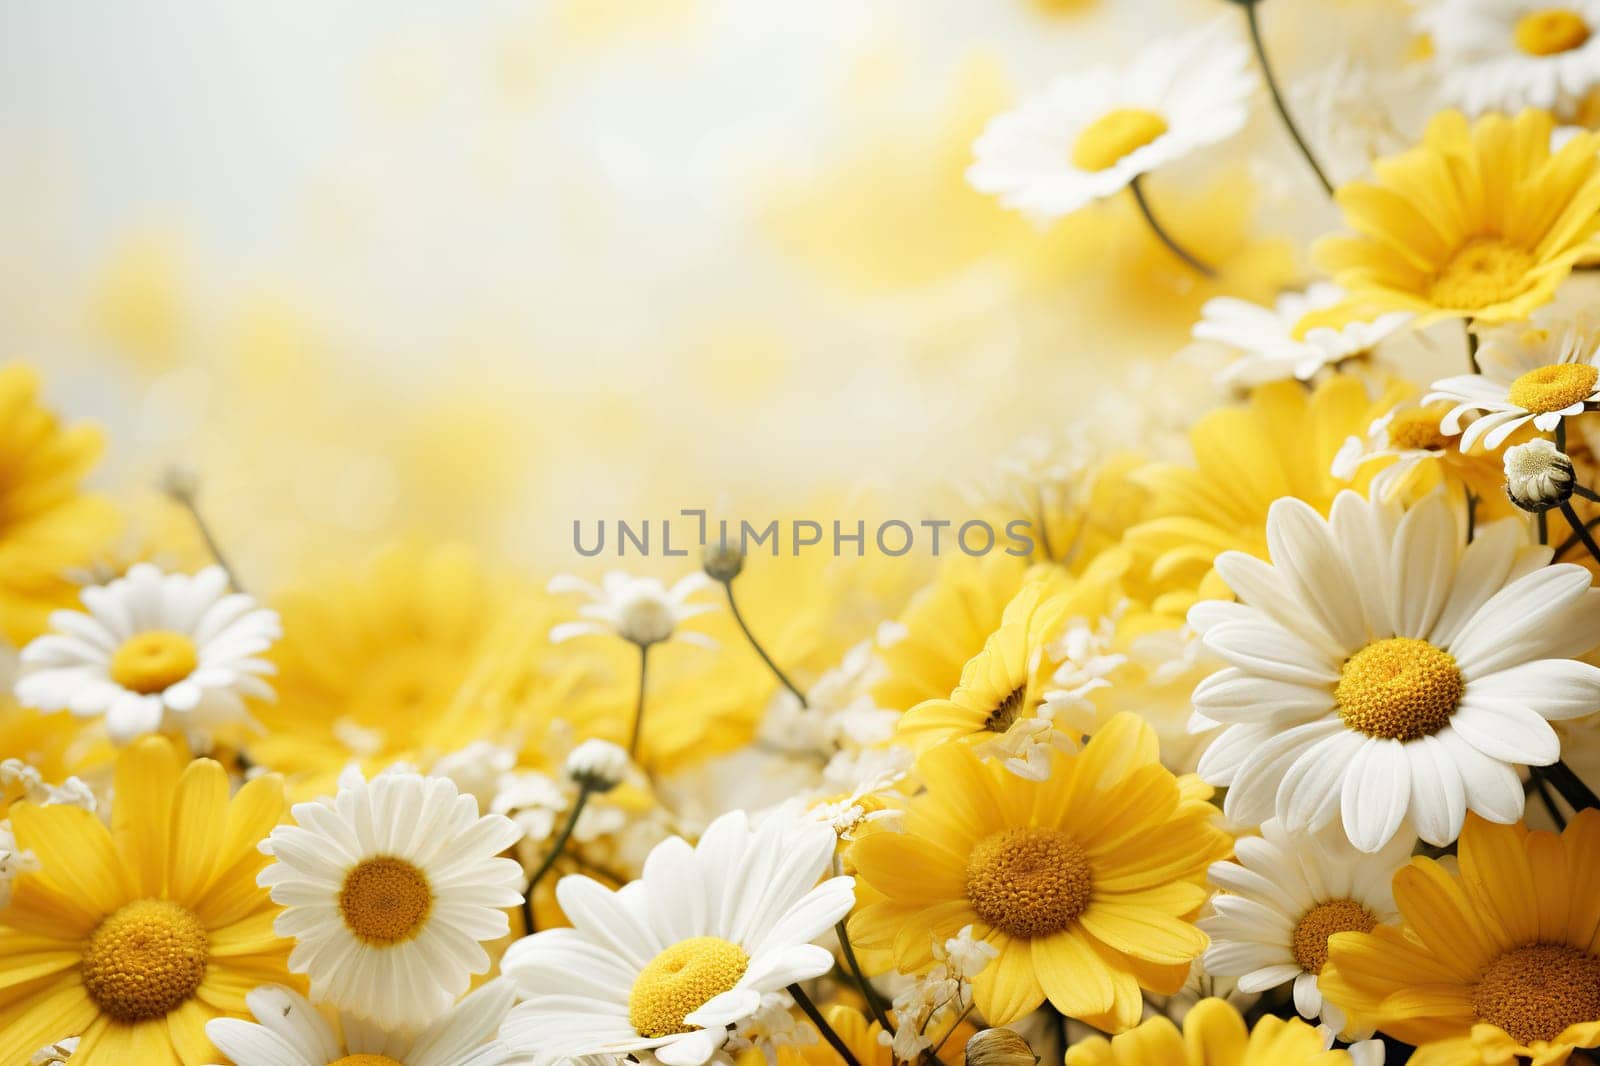 Horizontal background with white and yellow daisies and space for text.